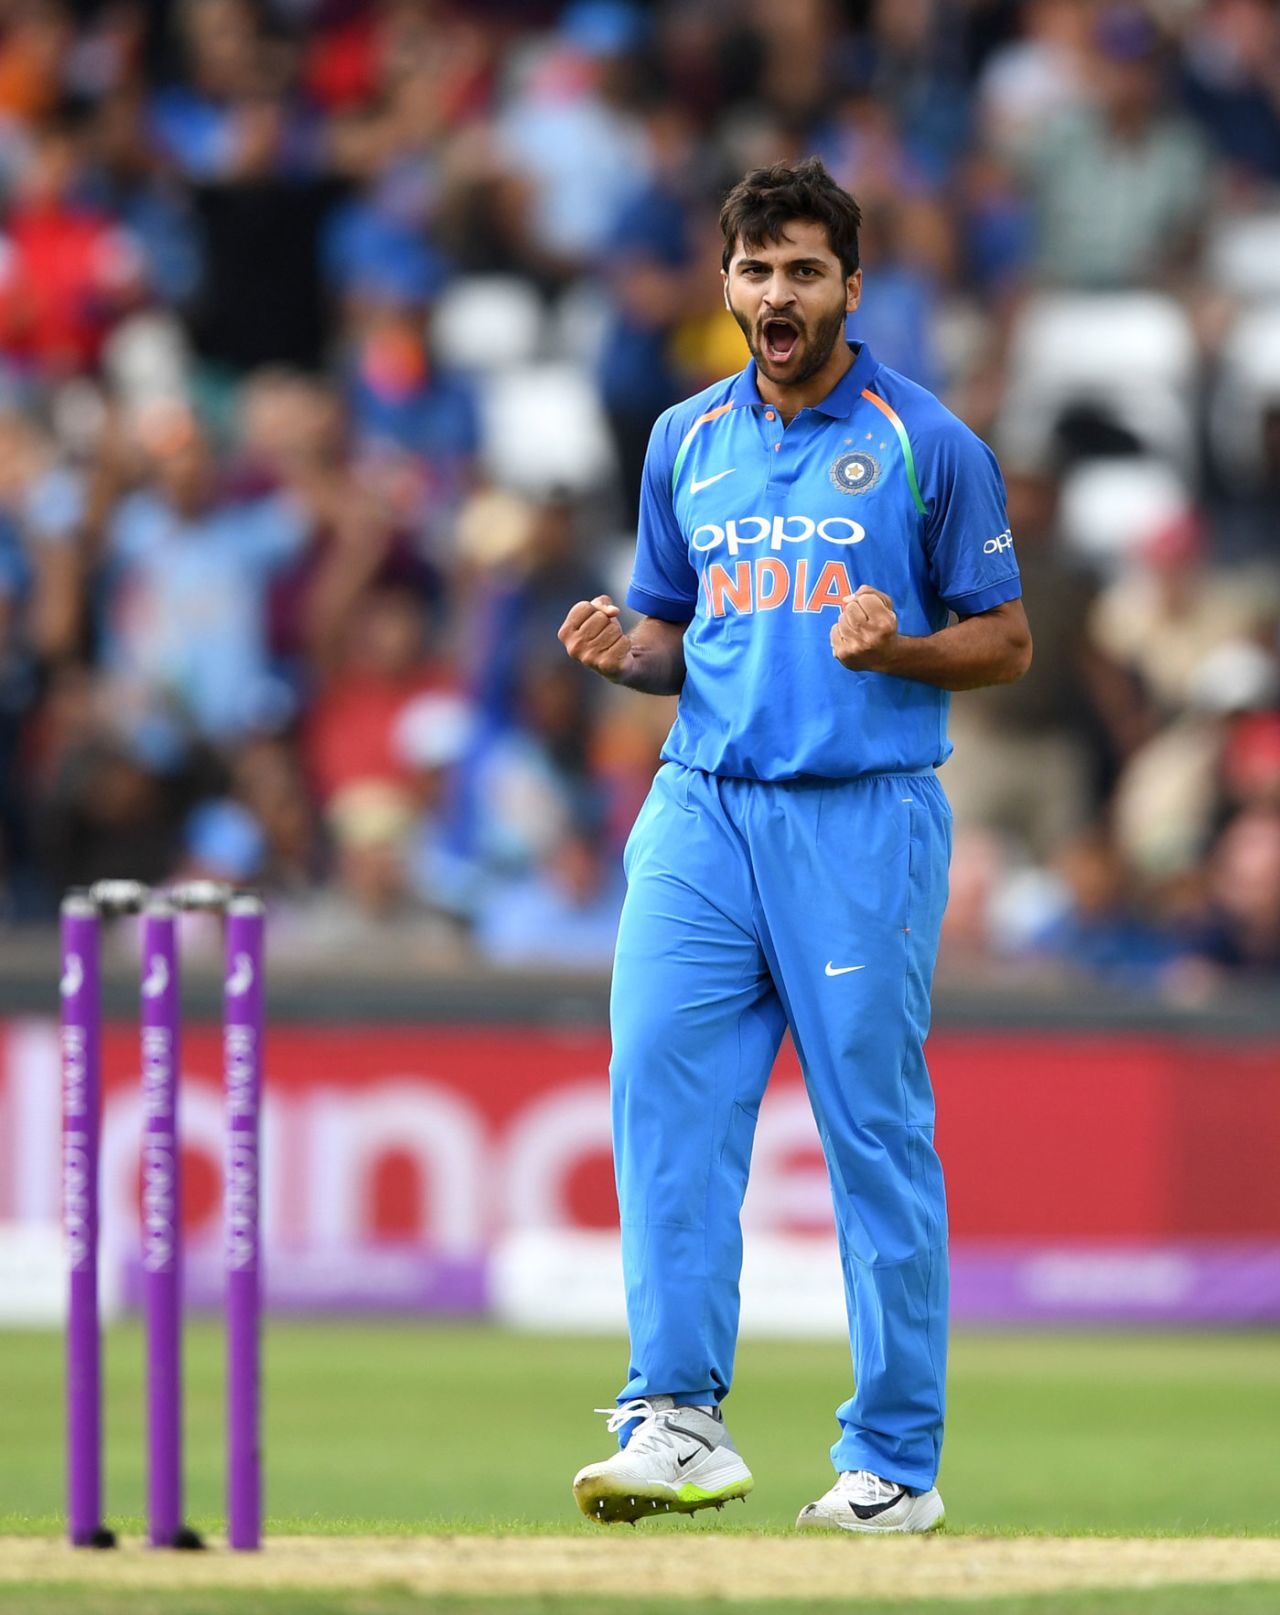 Shardul Thakur struck in his opening over, England v India, 3rd ODI, Headingley, July 17, 2018